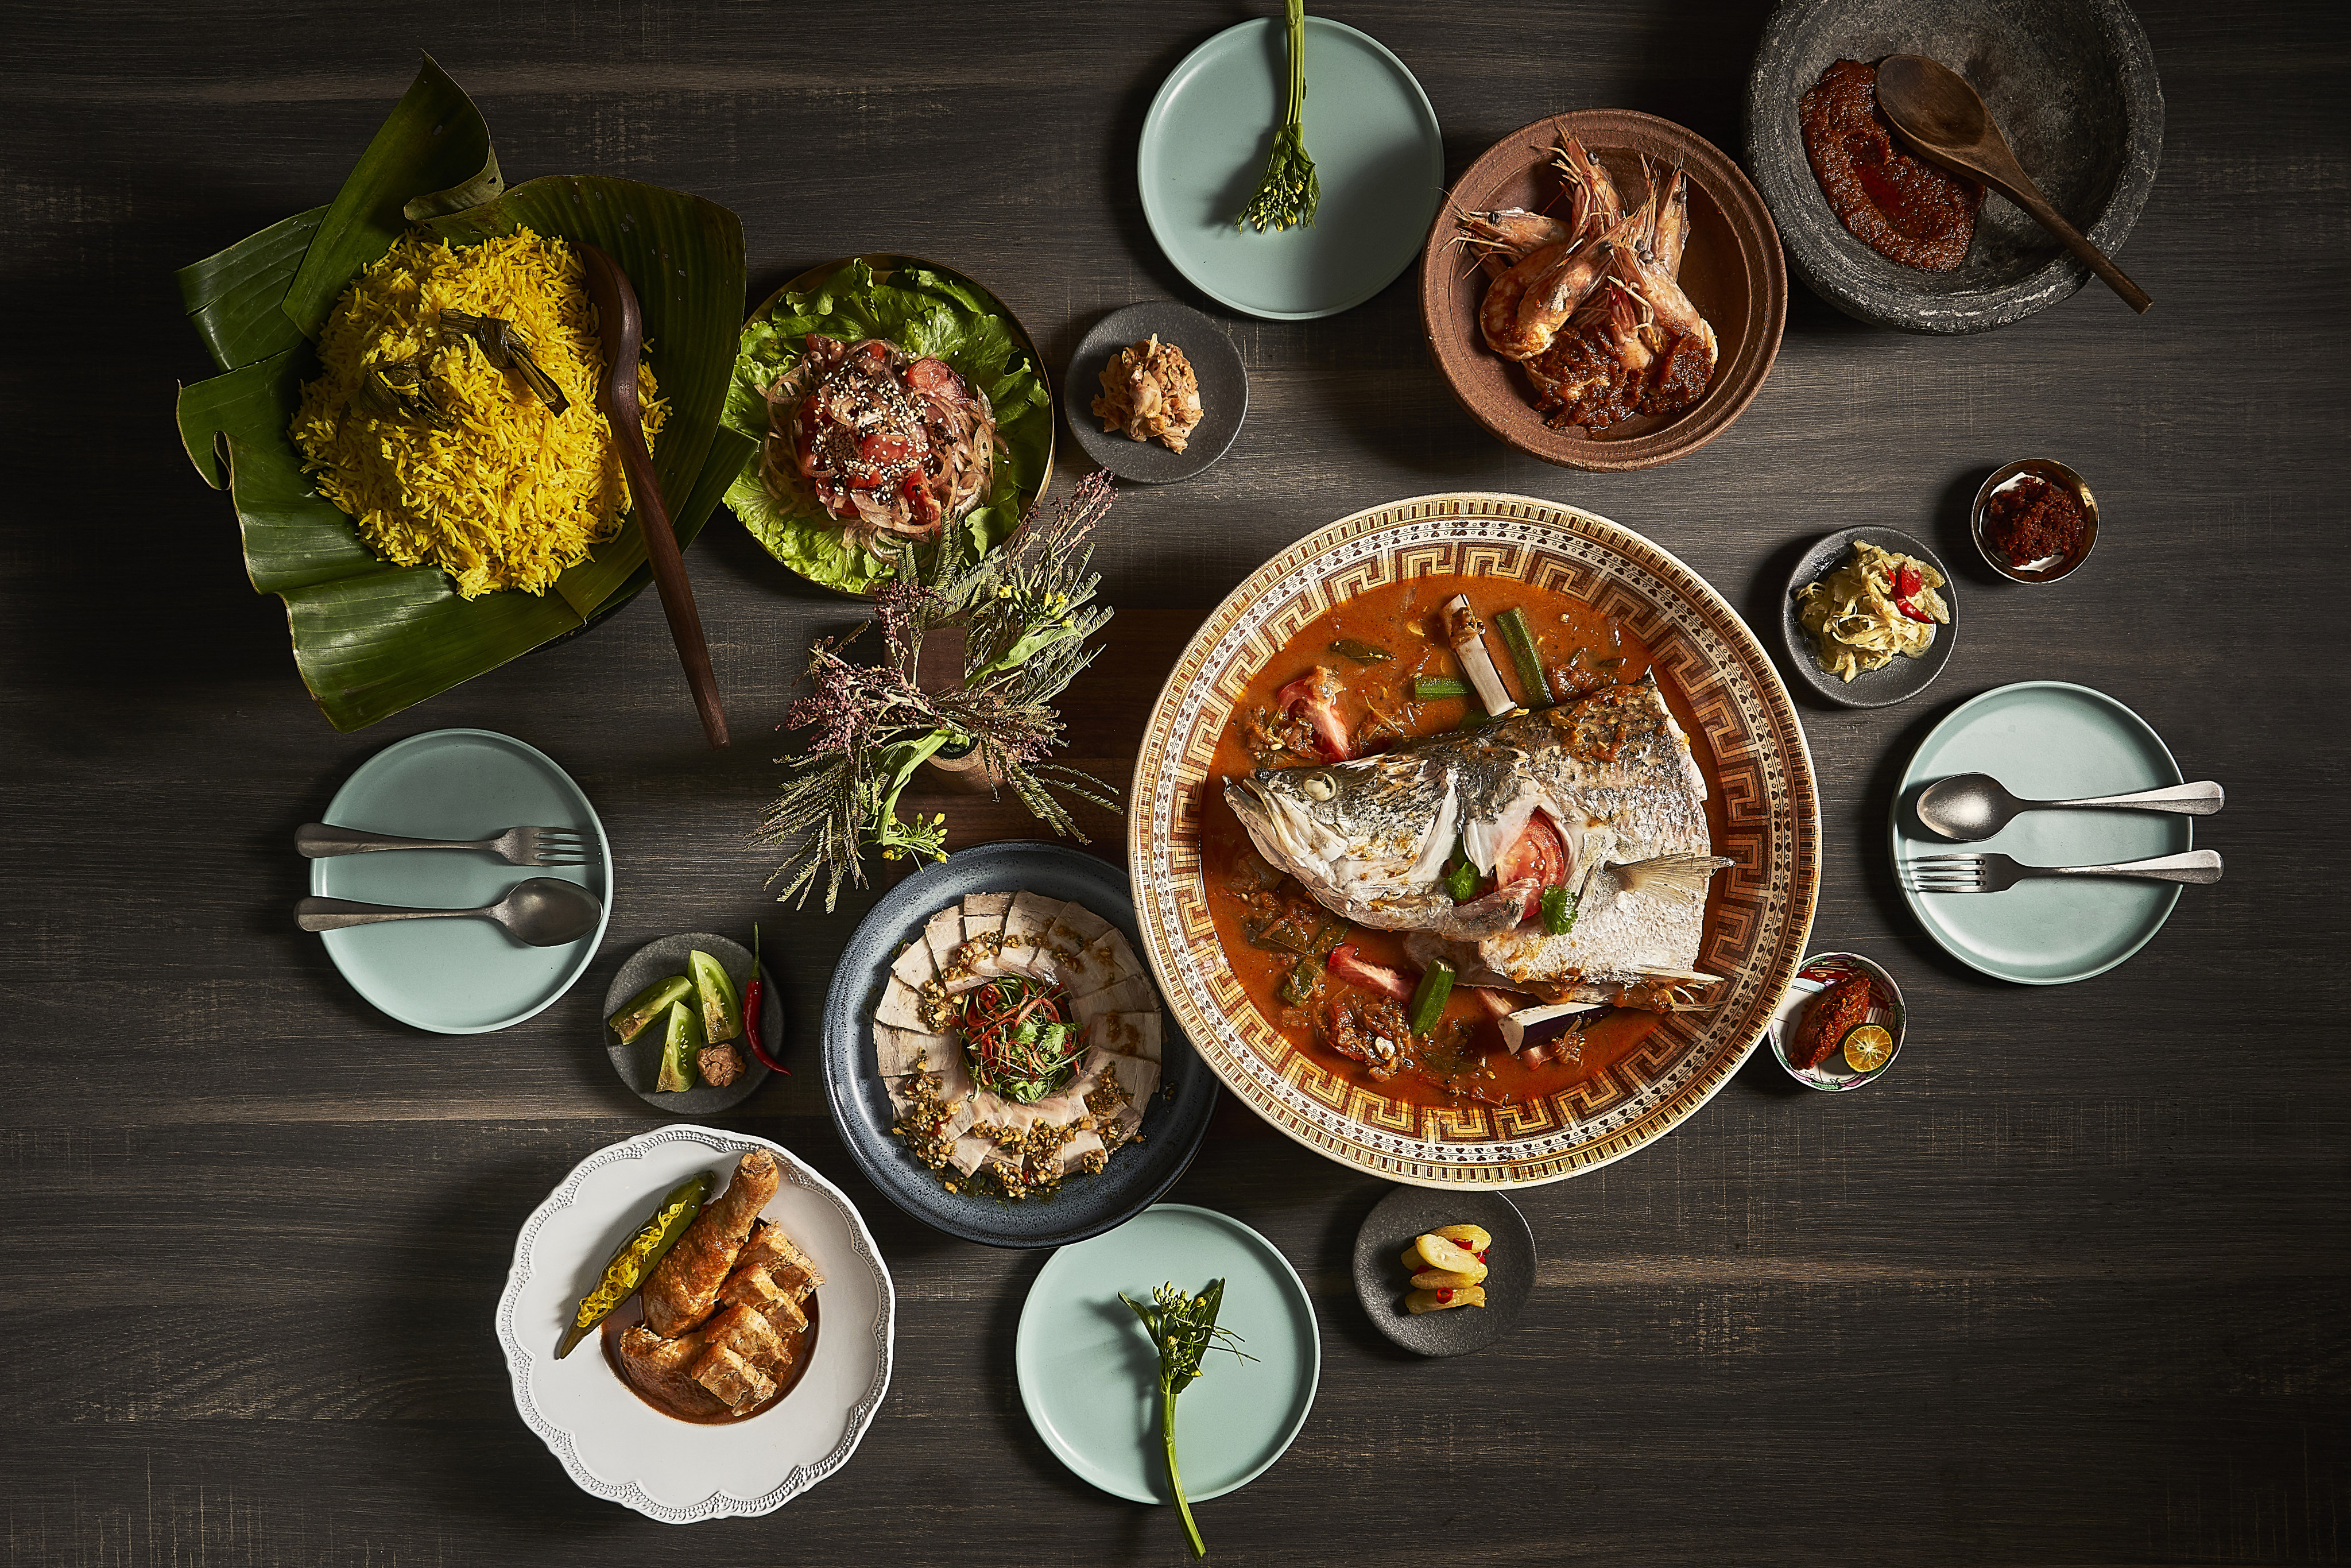 Dinner at Rempapa, a Singaporean restaurant. Chefs in the city state are rediscovering lesser known heritage dishes and showcasing them to a new generation of restaurant goers. Photo: Rempapa